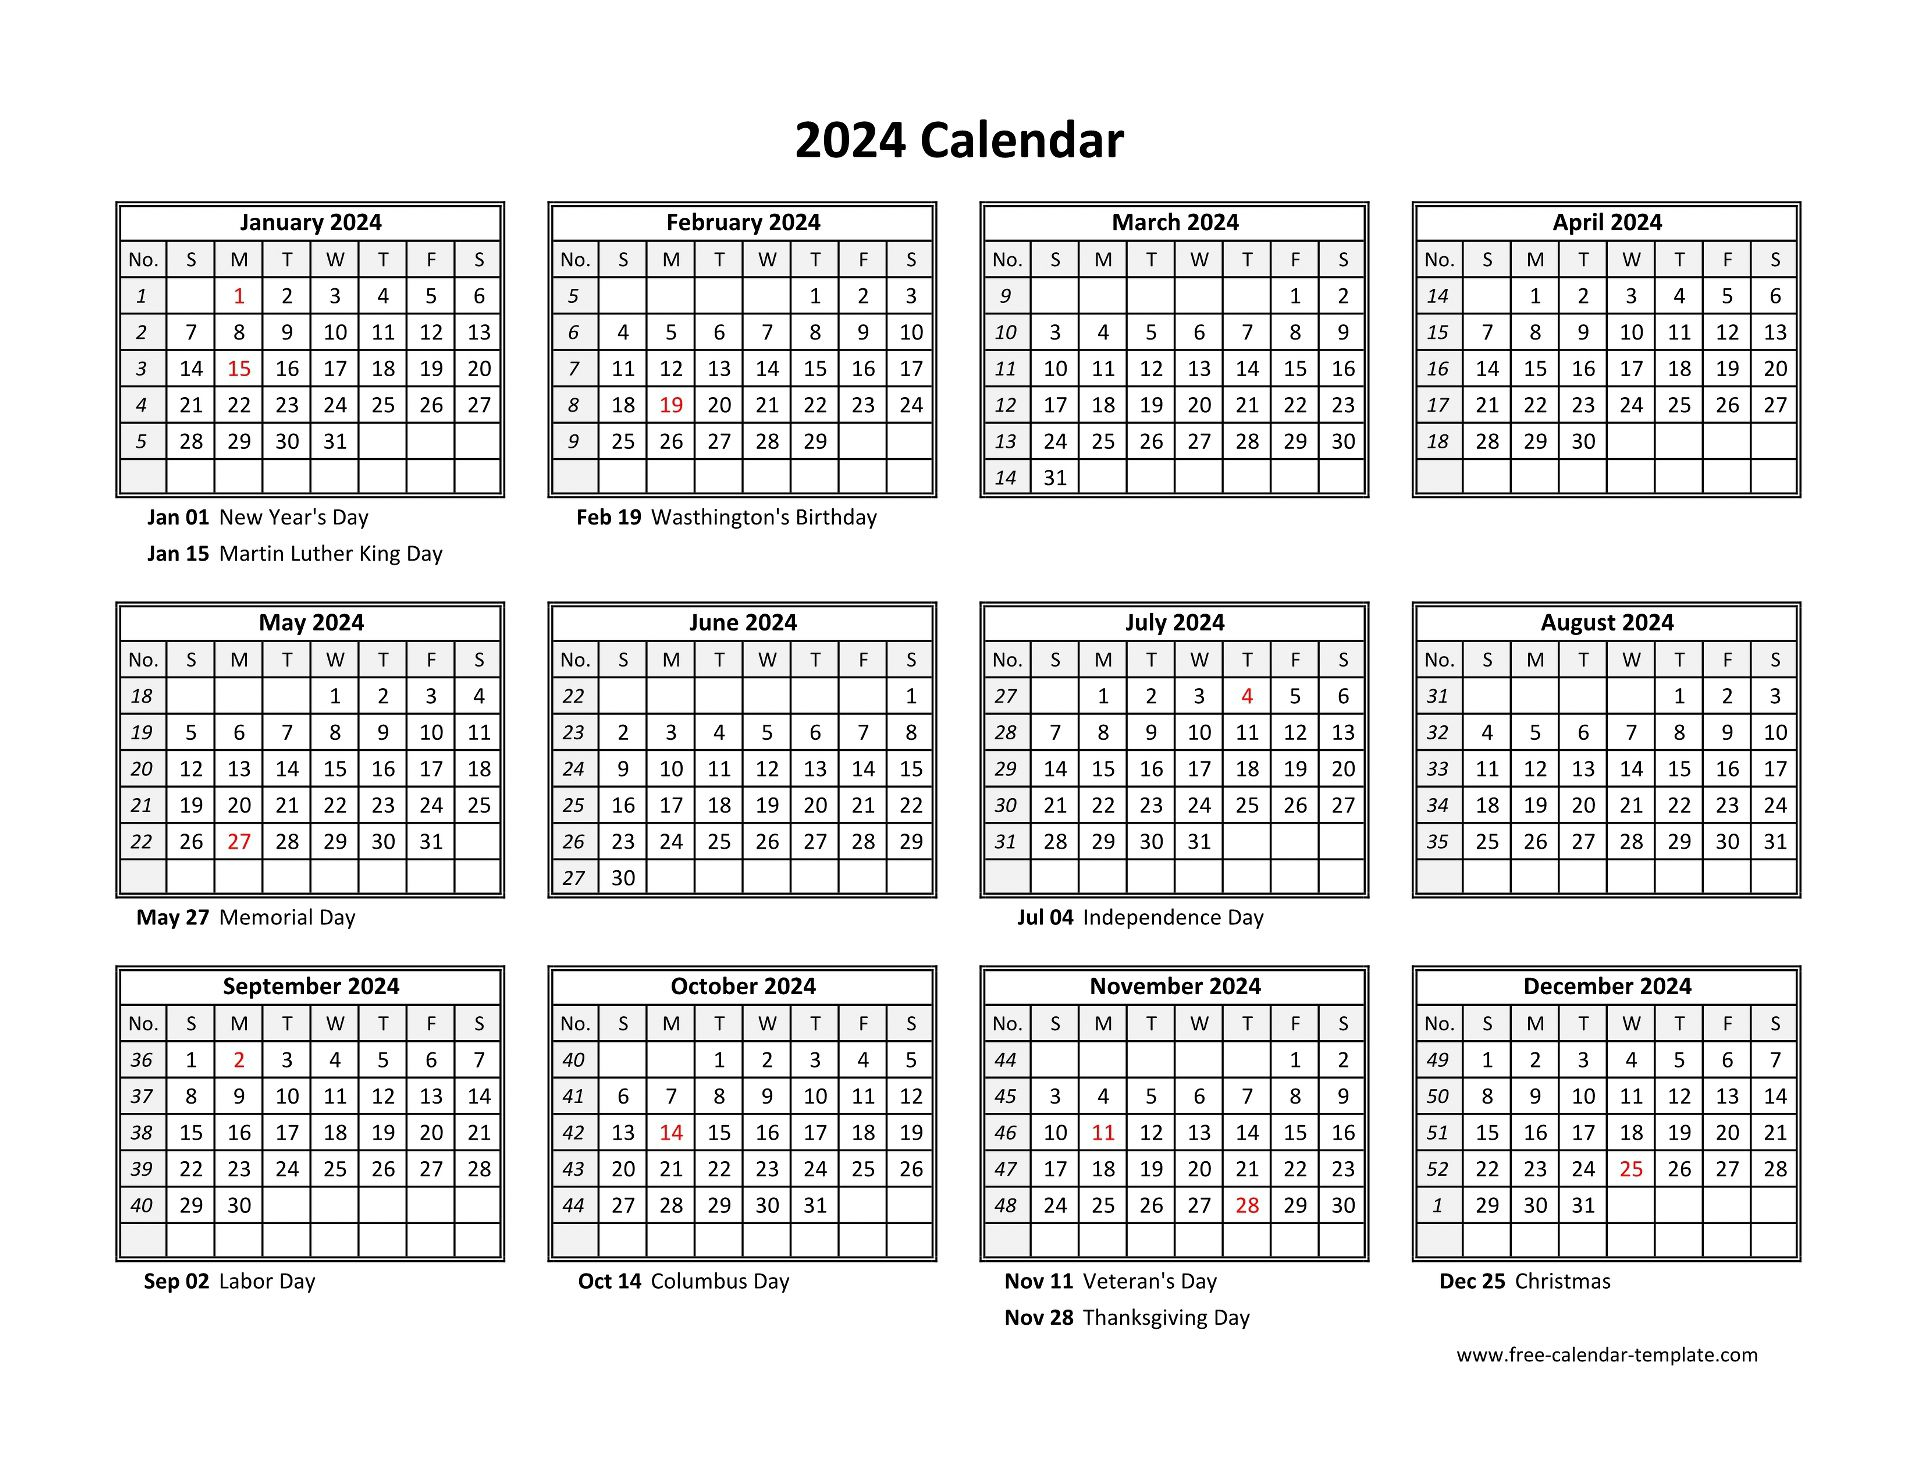 Yearly Calendar 2024 Printable With Federal Holidays | Free for 2024 Calendar Printable 12 Months